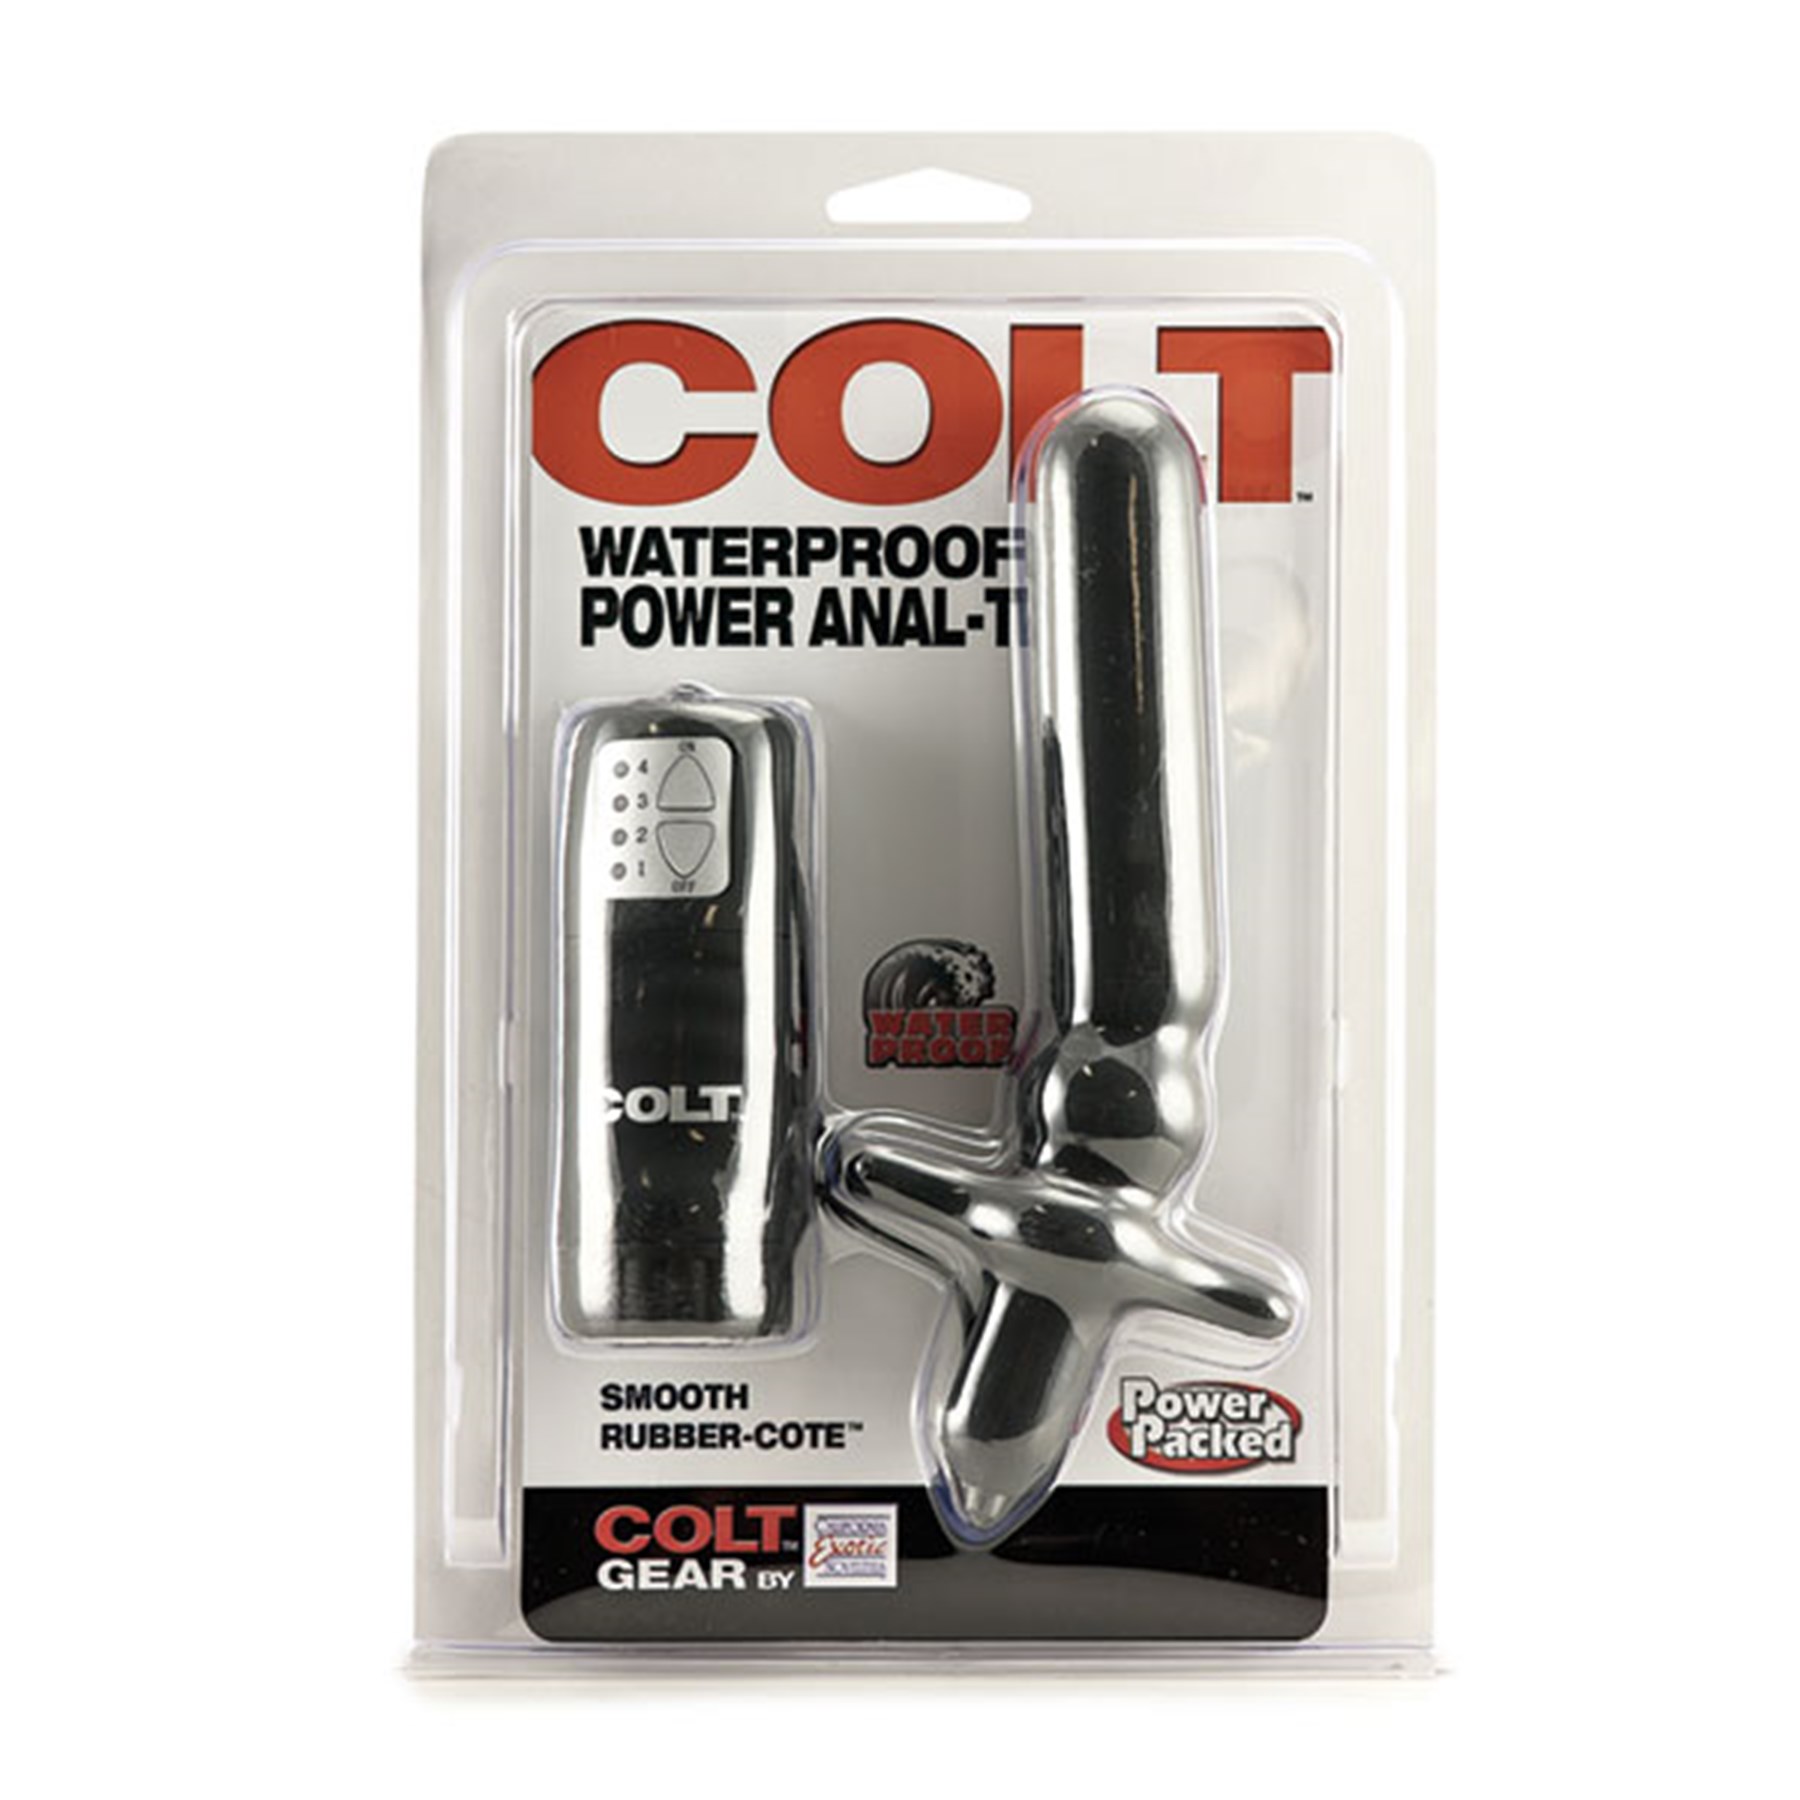 Colt Waterproof Anal T packaging front